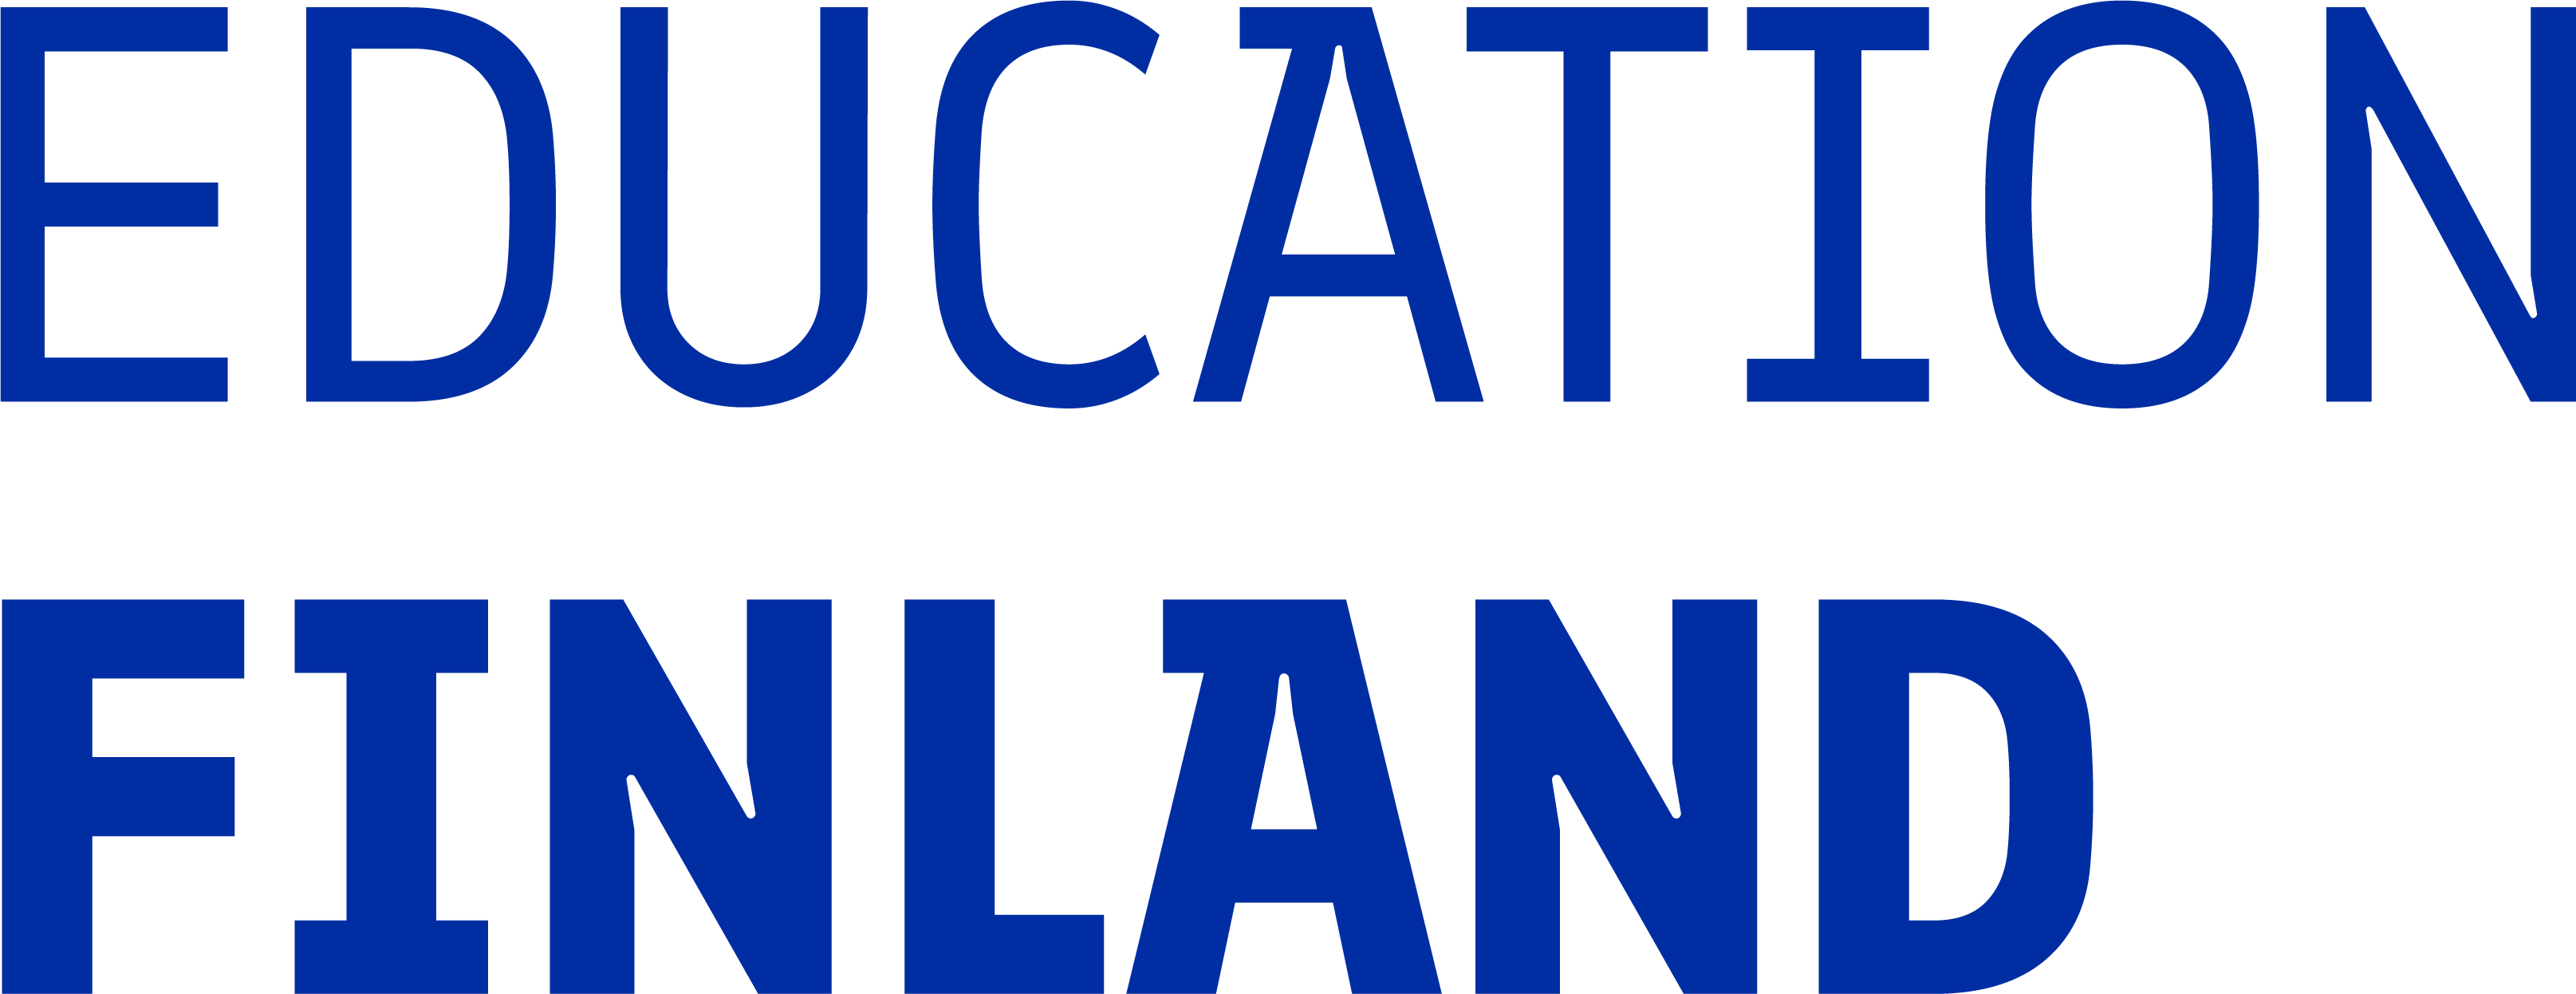 Finnish National Agency for Education; Education Finland